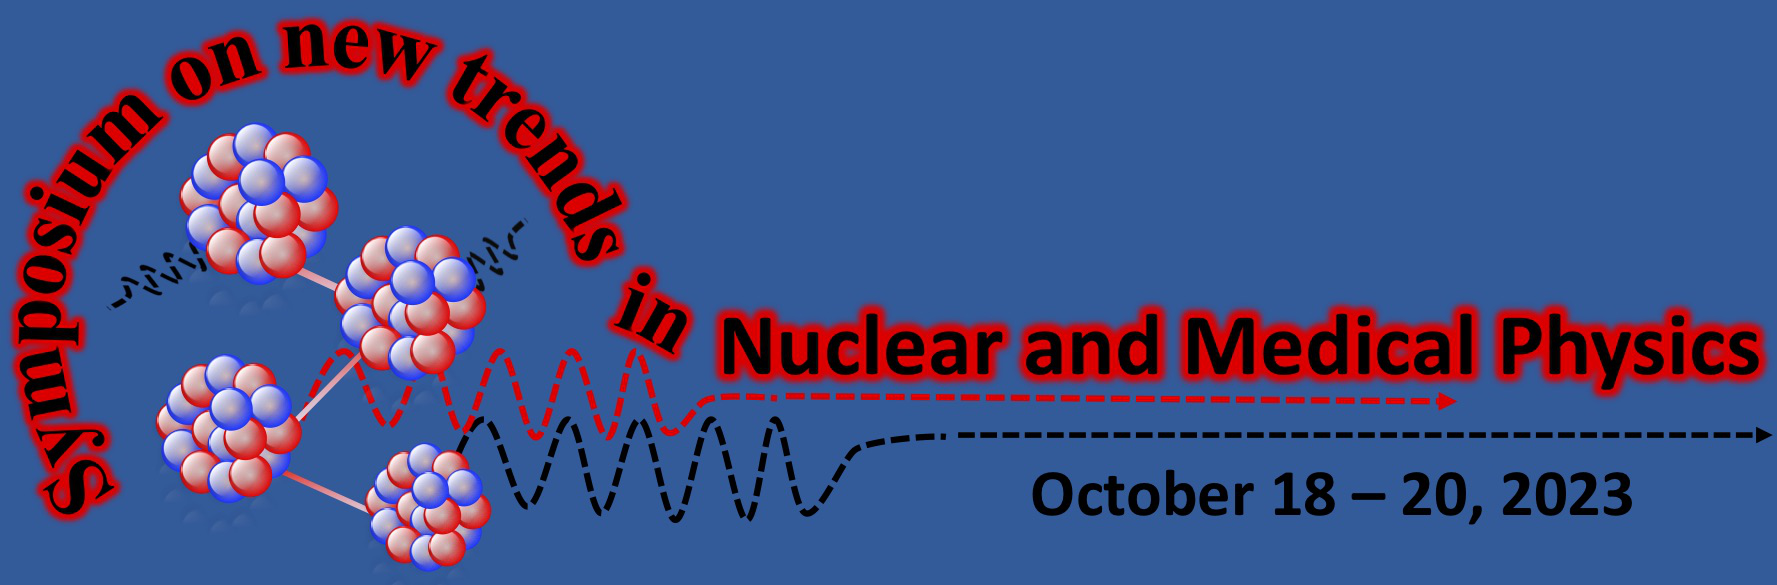 Symposium on new trends in nuclear and medical physics